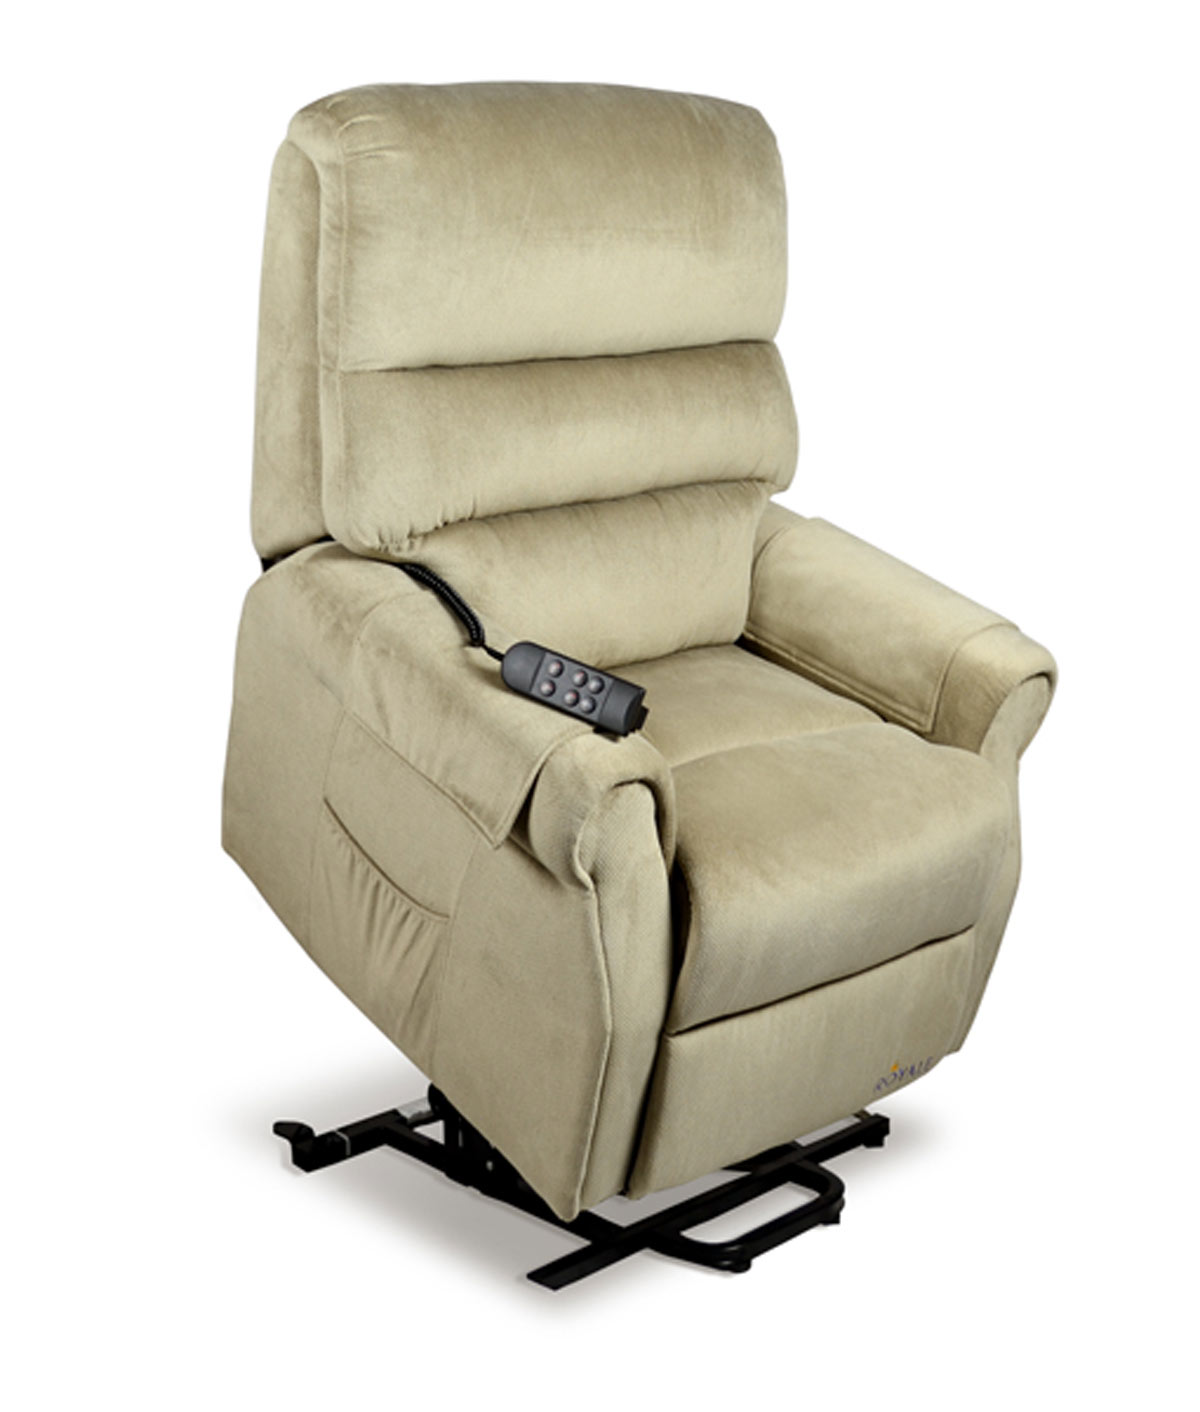 Royale’s Signature Mayfair recliner lift chair made from High Quality Custom Soft Angora Fabrics features class in any setting and home décor.